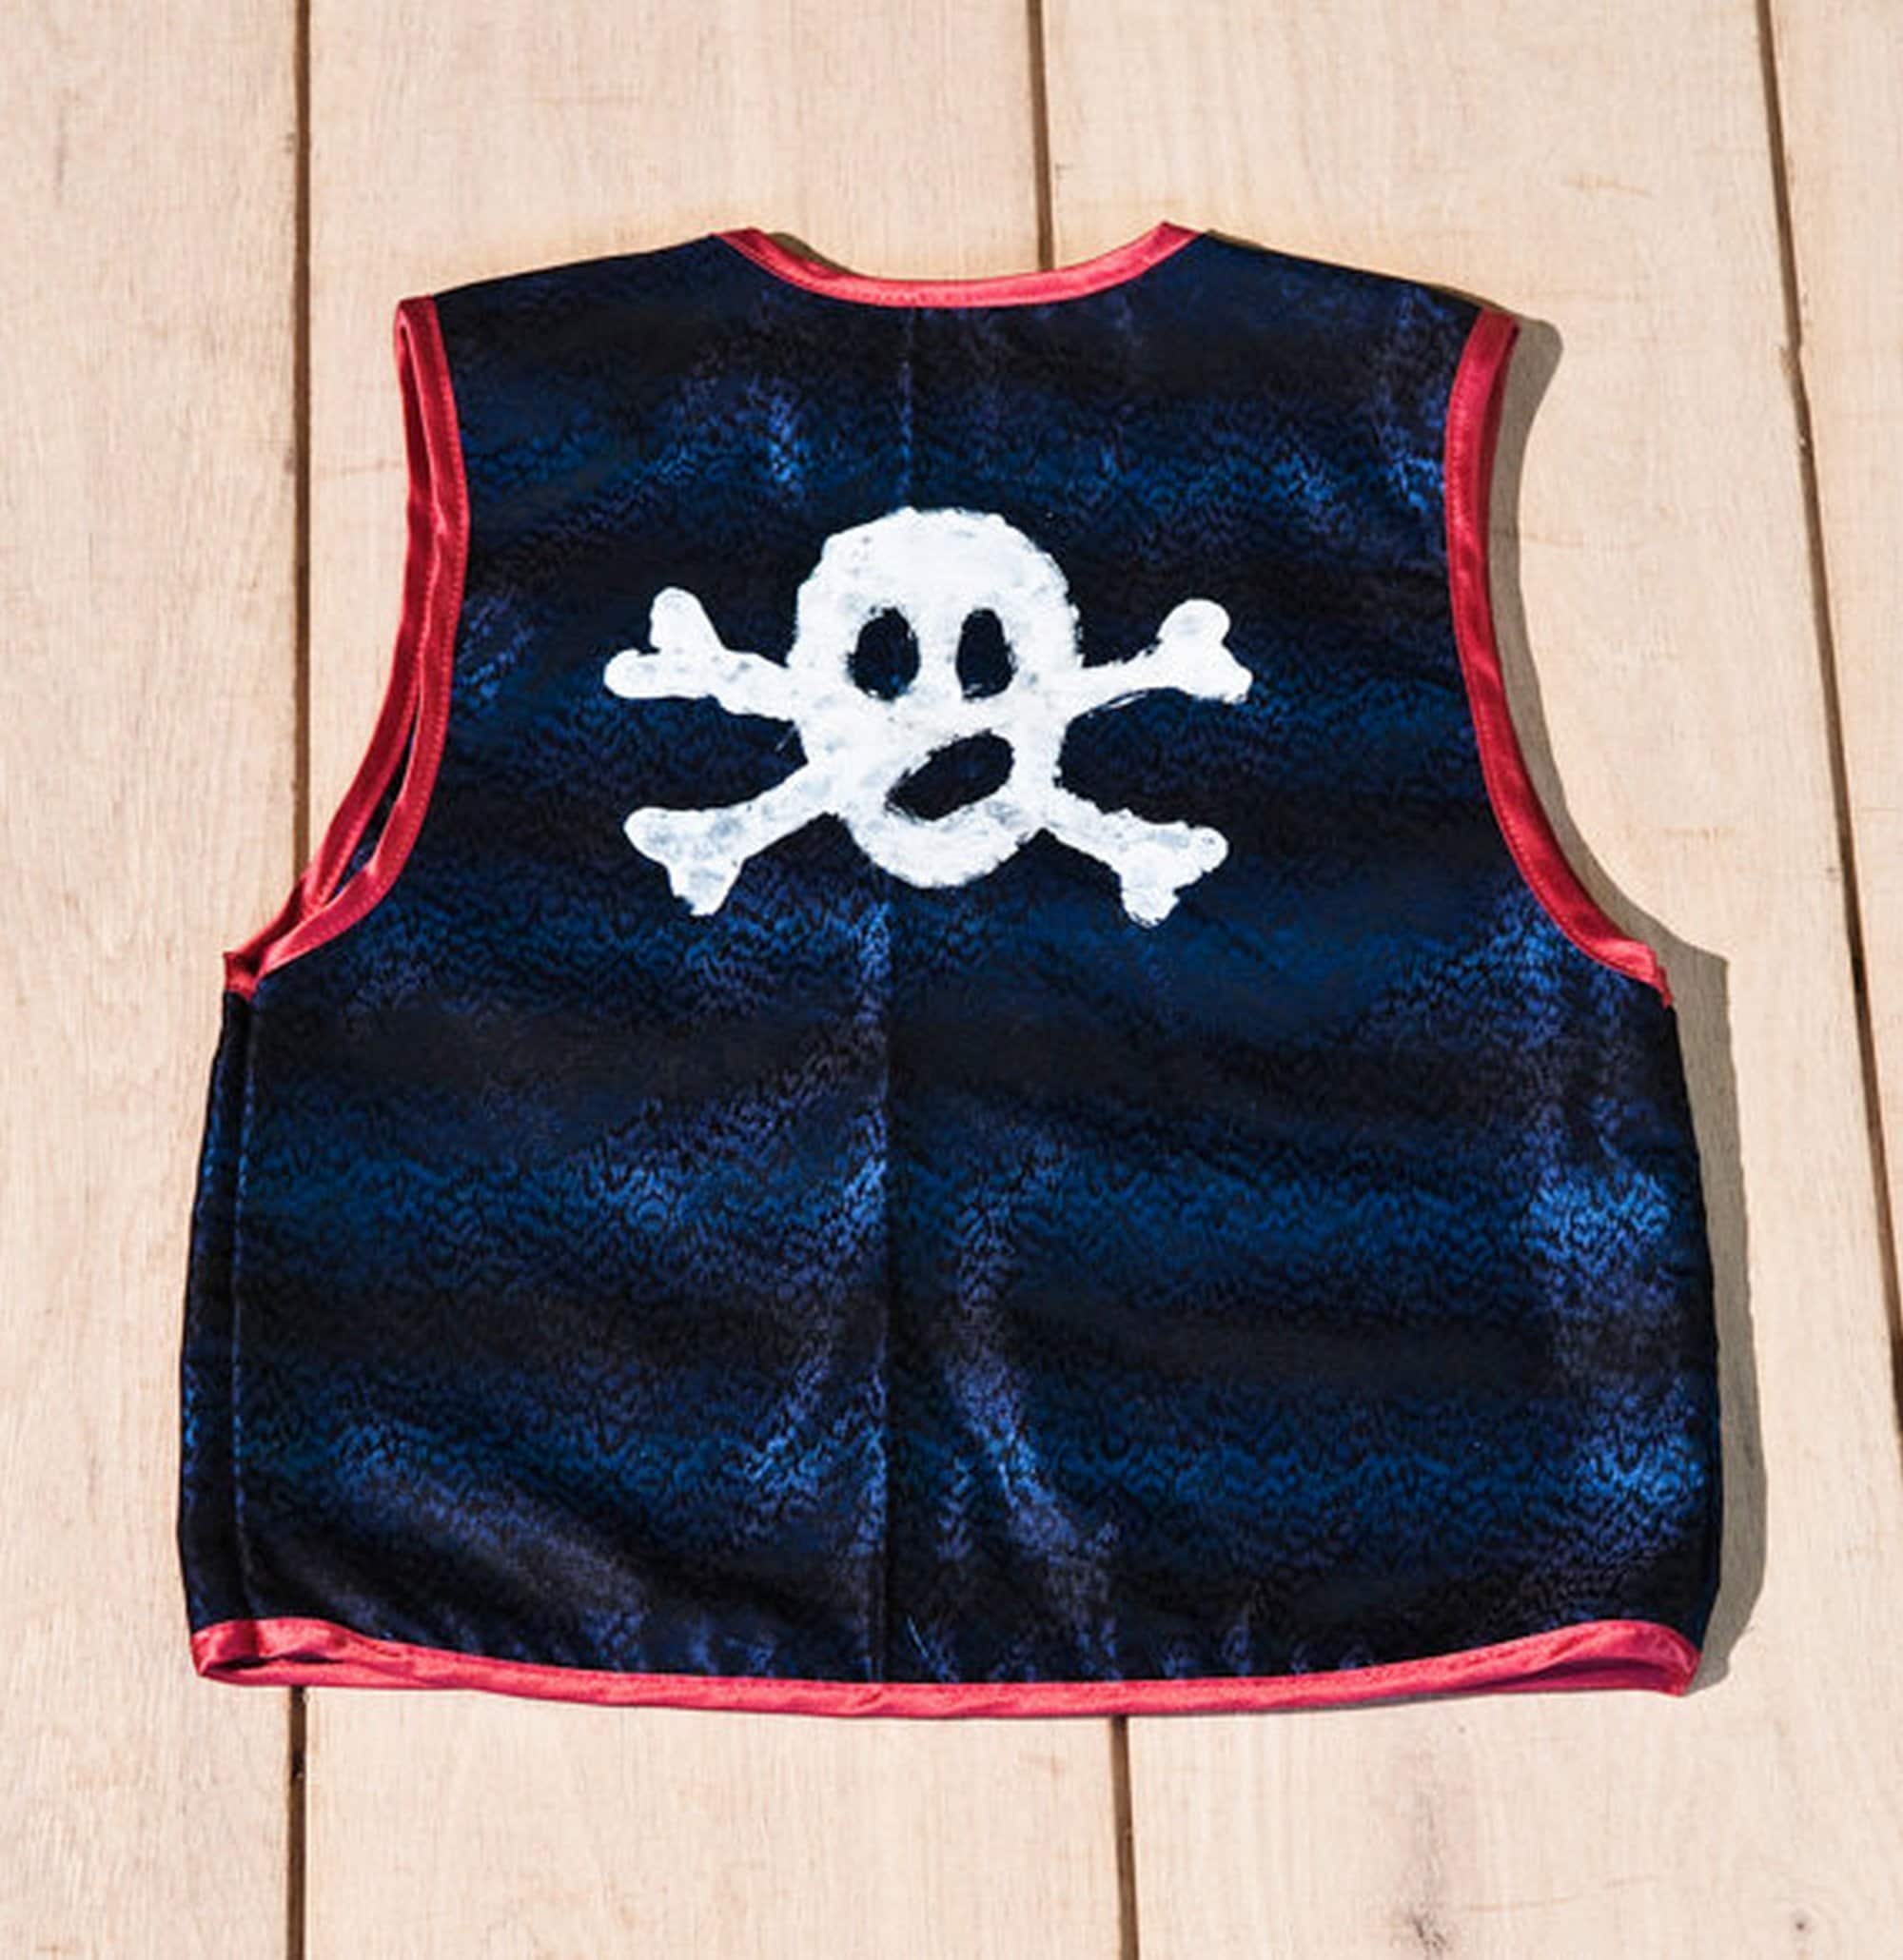 Kids Pirate Costume, Pirate Vest, Boy Pirate Costume, Gilet Pirate in Damask Fabric And Painted Skull, Kids Costumes, Dress Up Clothes